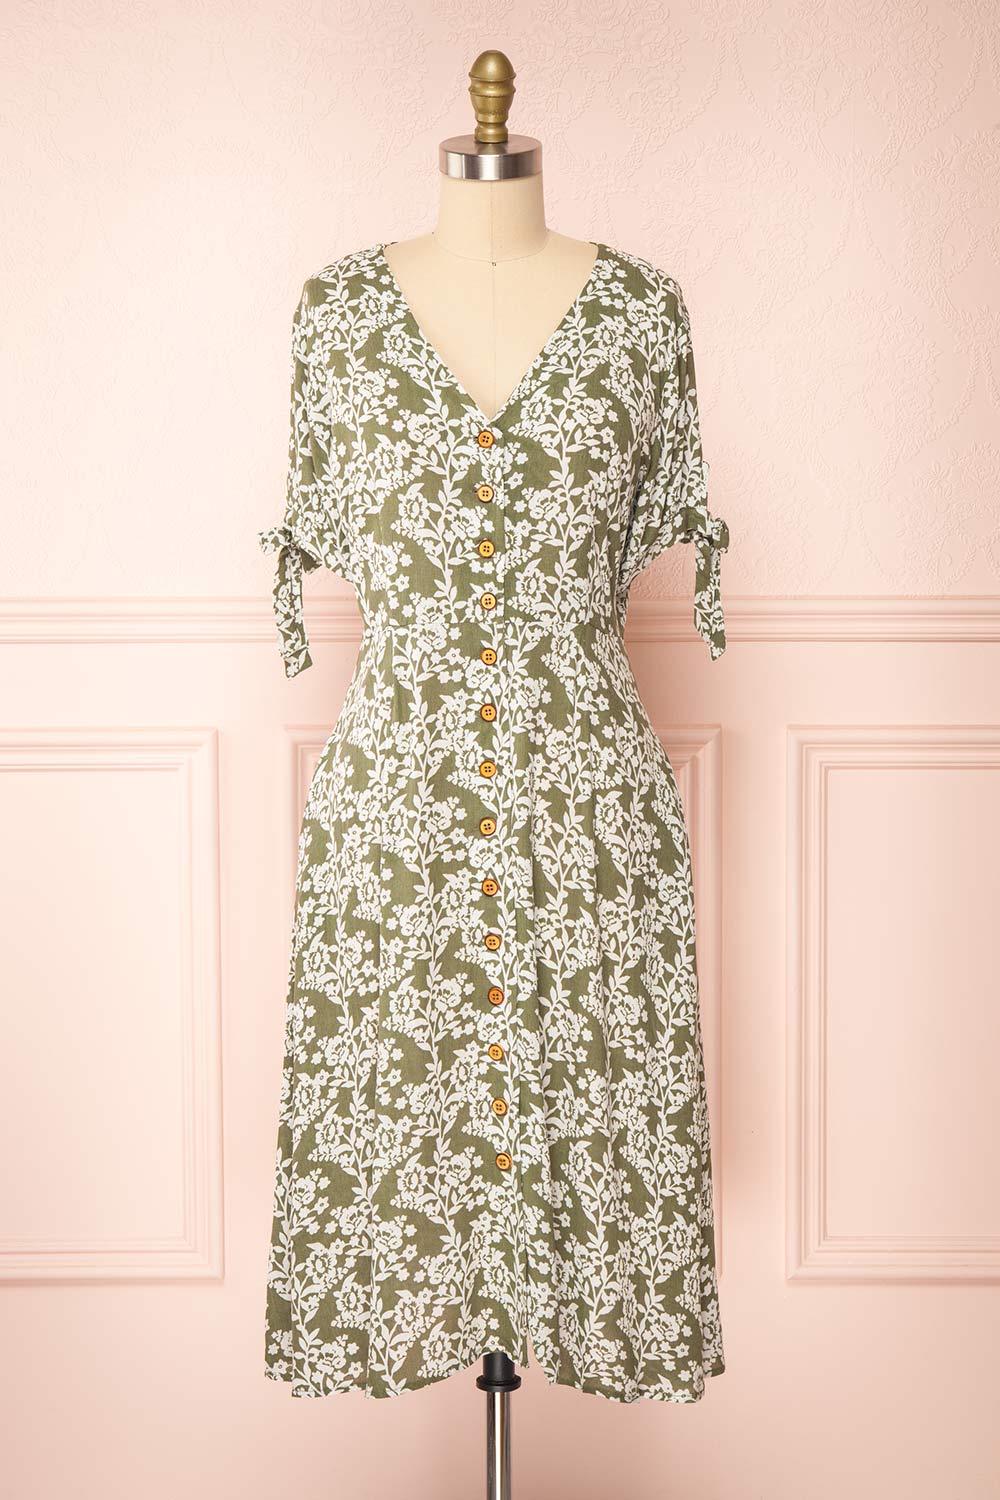 Yavanna Green Short Sleeve Buttoned Floral Midi Dress | Boutique 1861 front view 